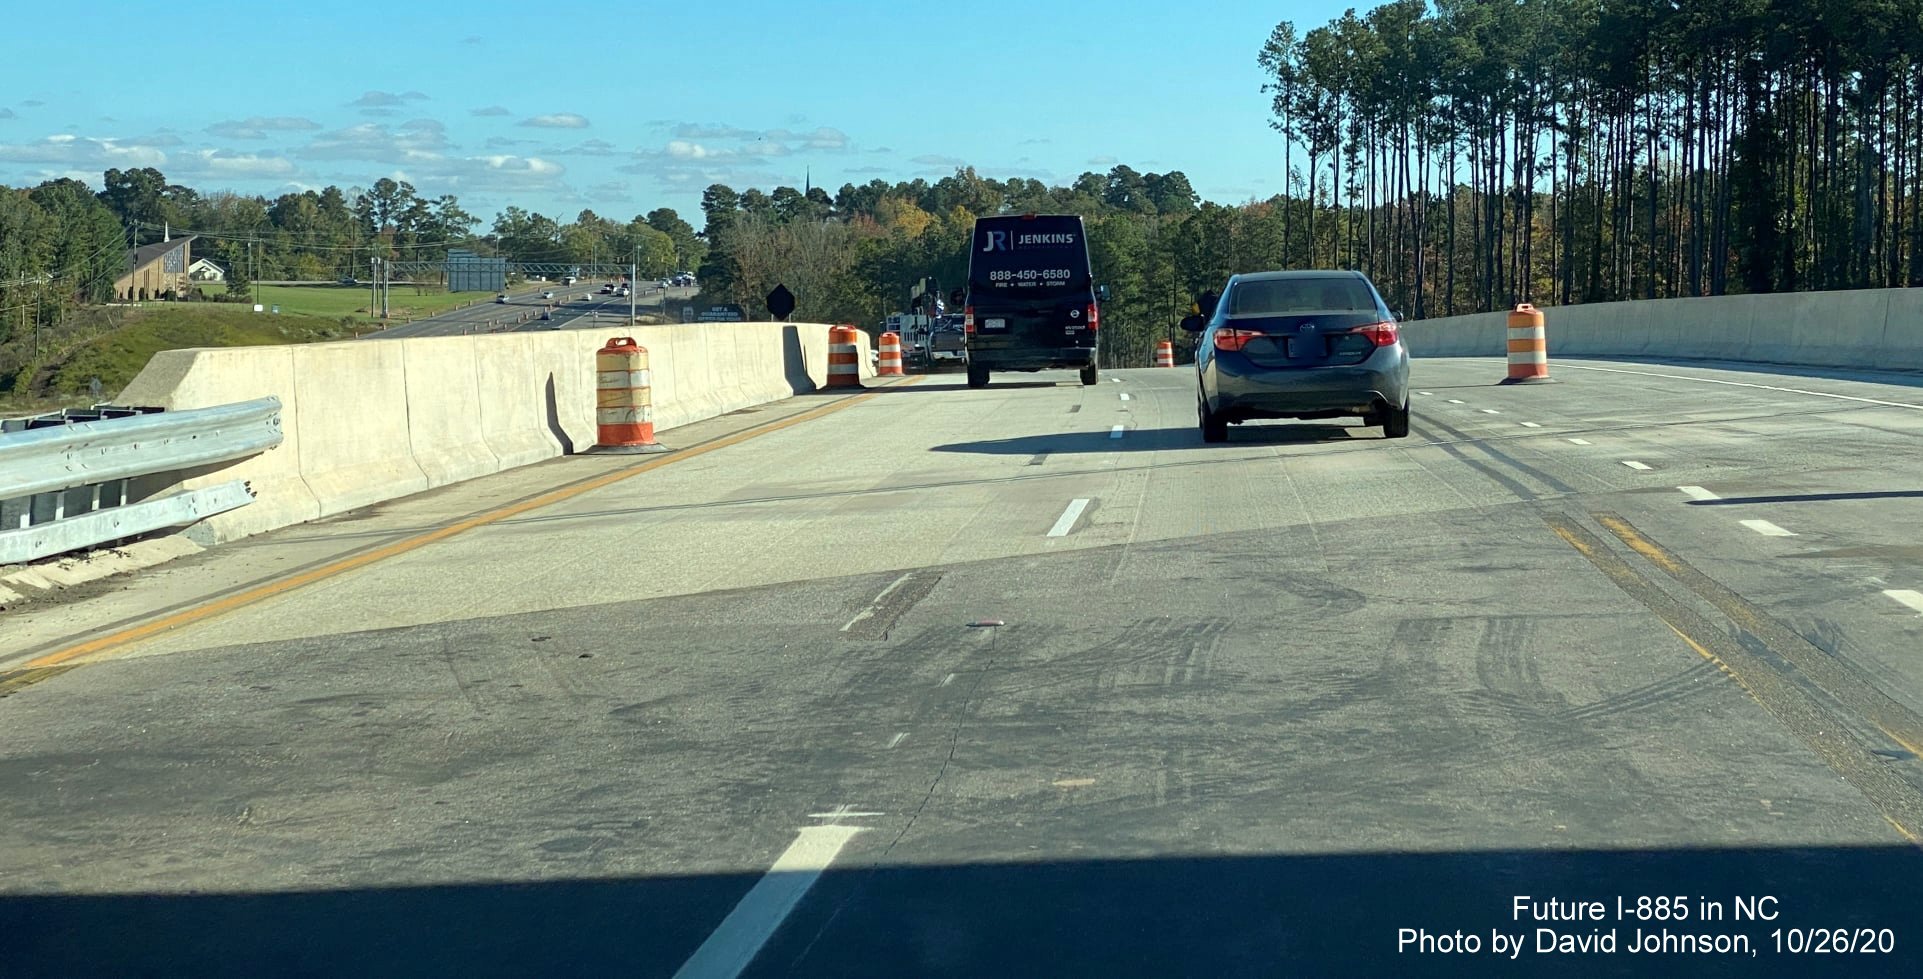 Image of traffic on future US 70 east exit ramp from I-885 South heading over bridge over I-885 North East End Connector in Durham, by David Johnson October 2020